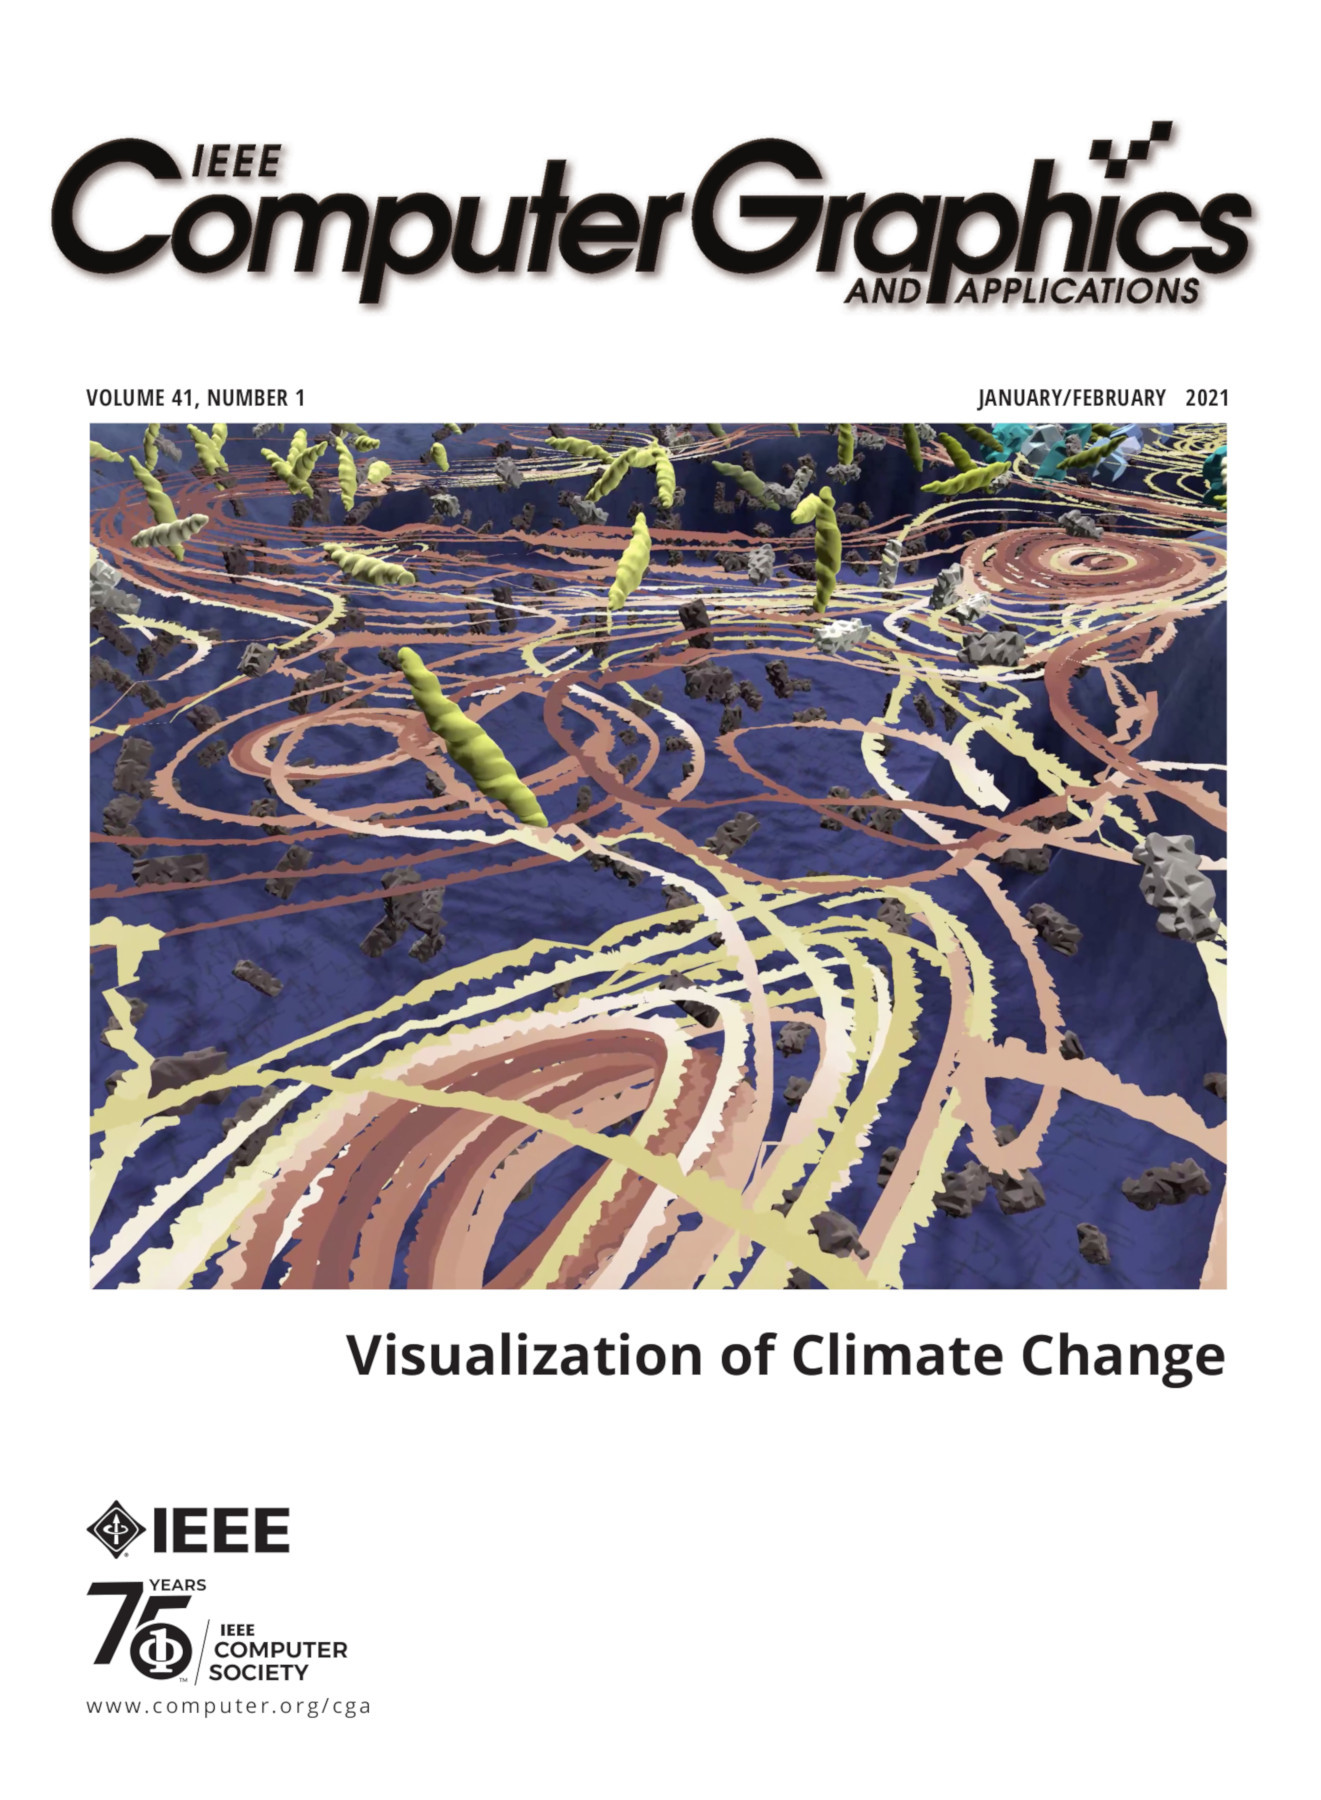 IEEE Computer Graphics and Applications January/February 2021 Vol. 41 No. 1